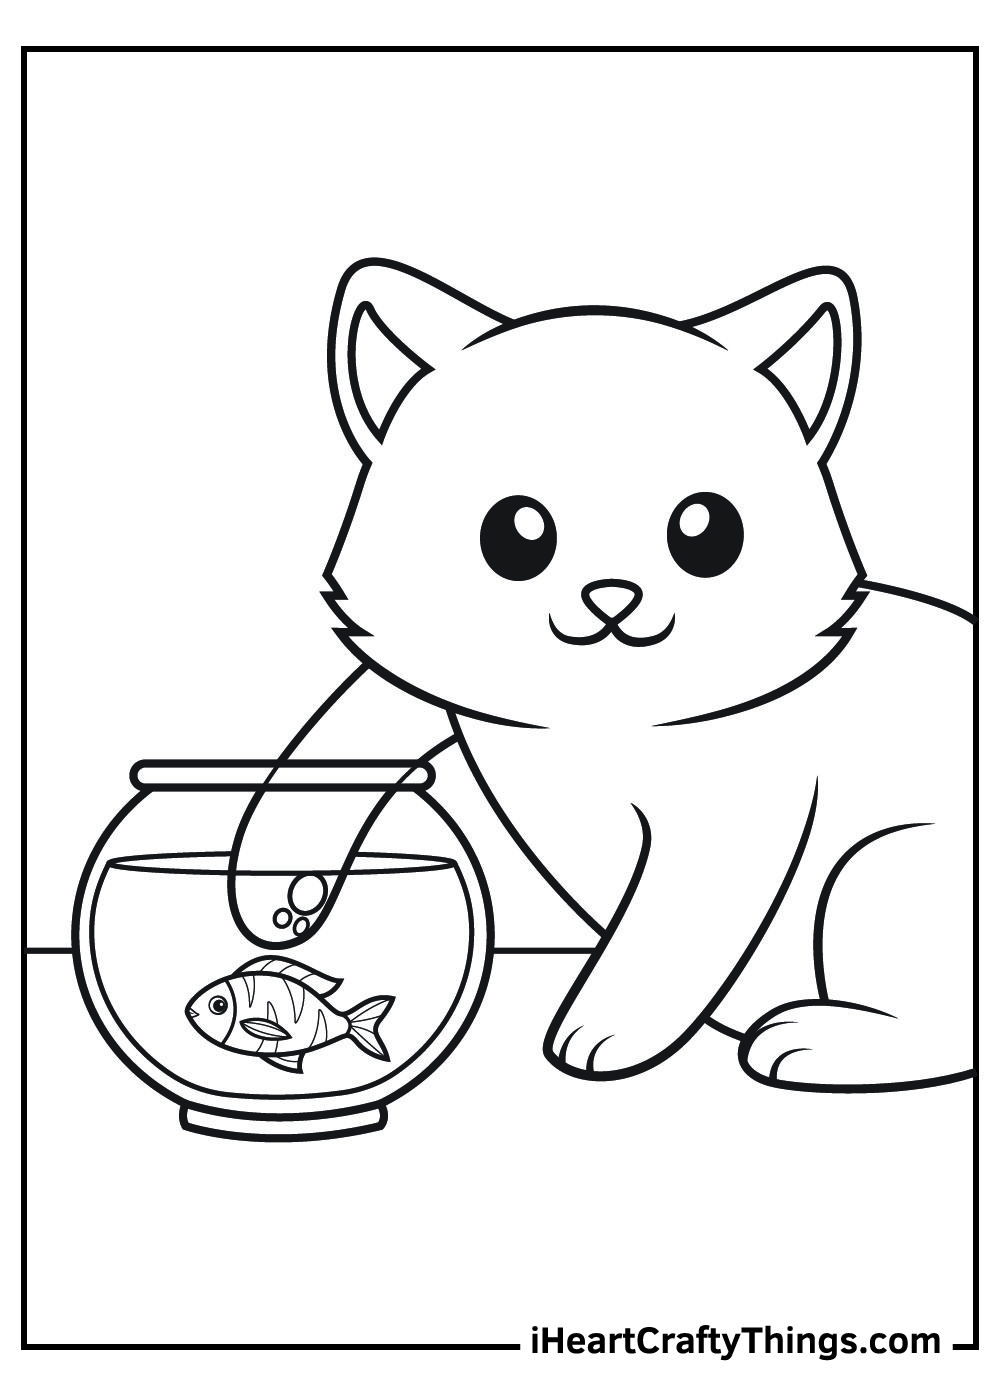 Dog and cat coloring pages cat coloring page cat coloring book cat colors